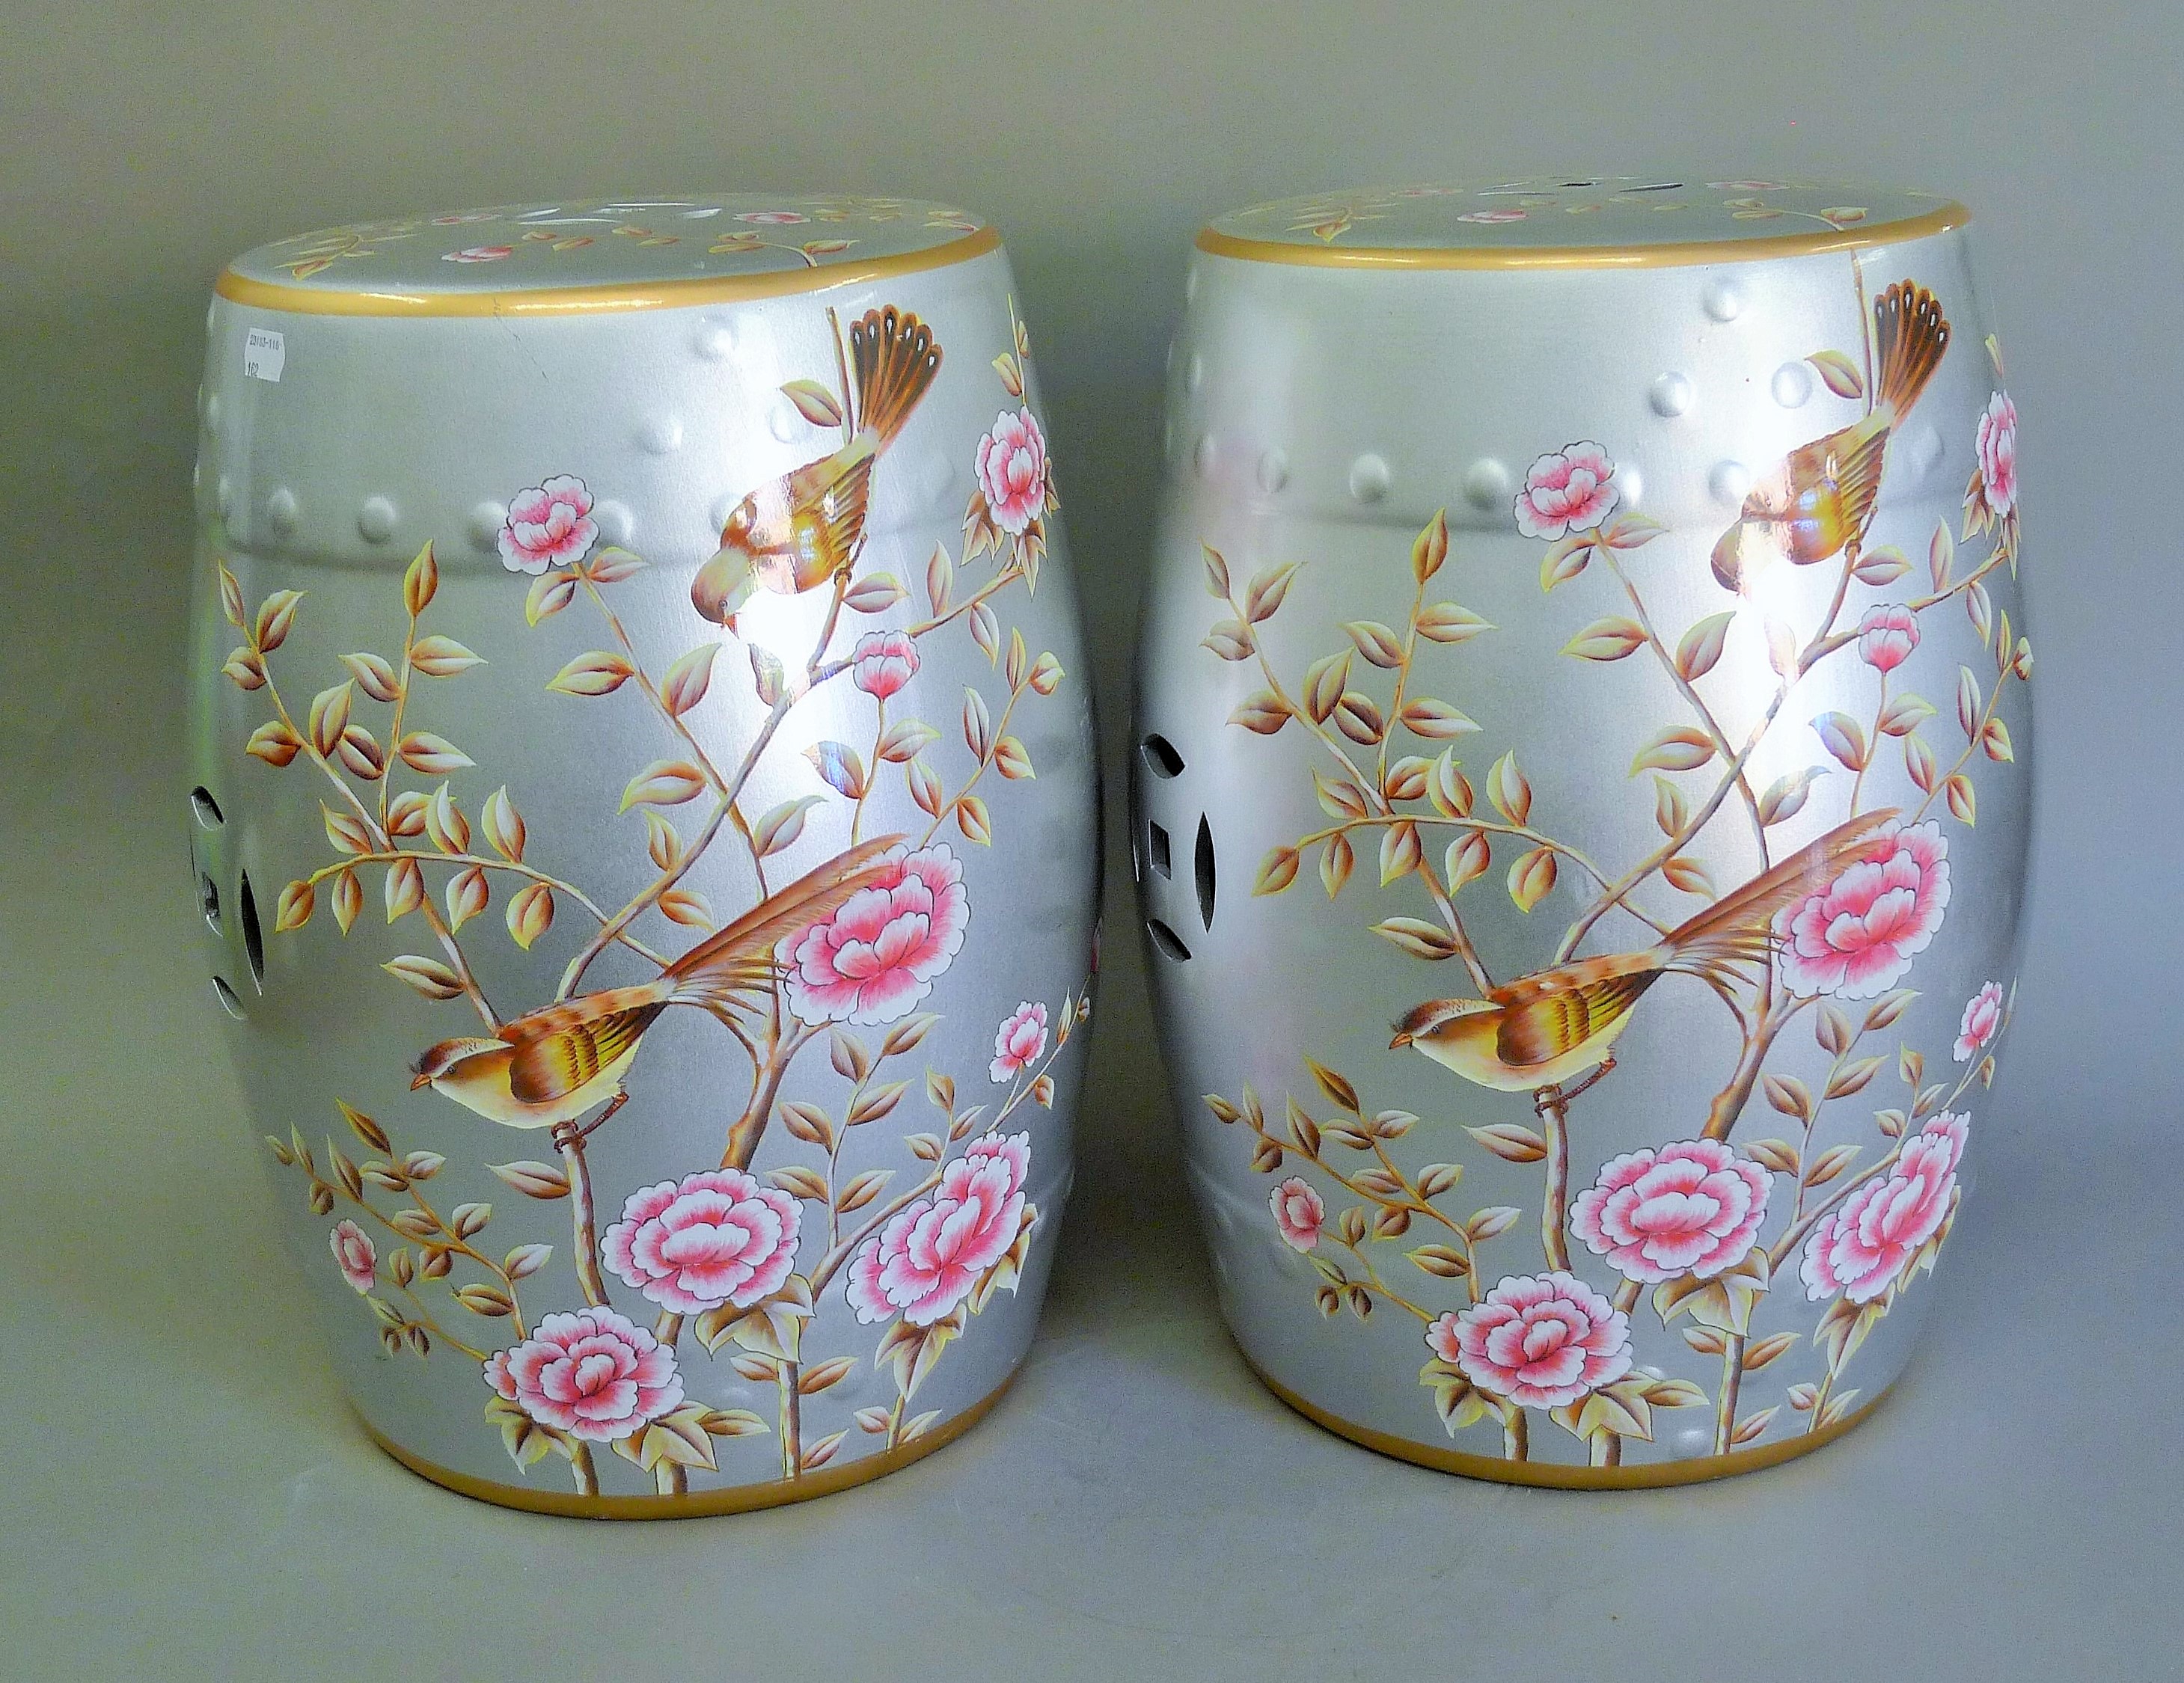 A pair of silvered barrel stools decorated with birds. 45 cm high.